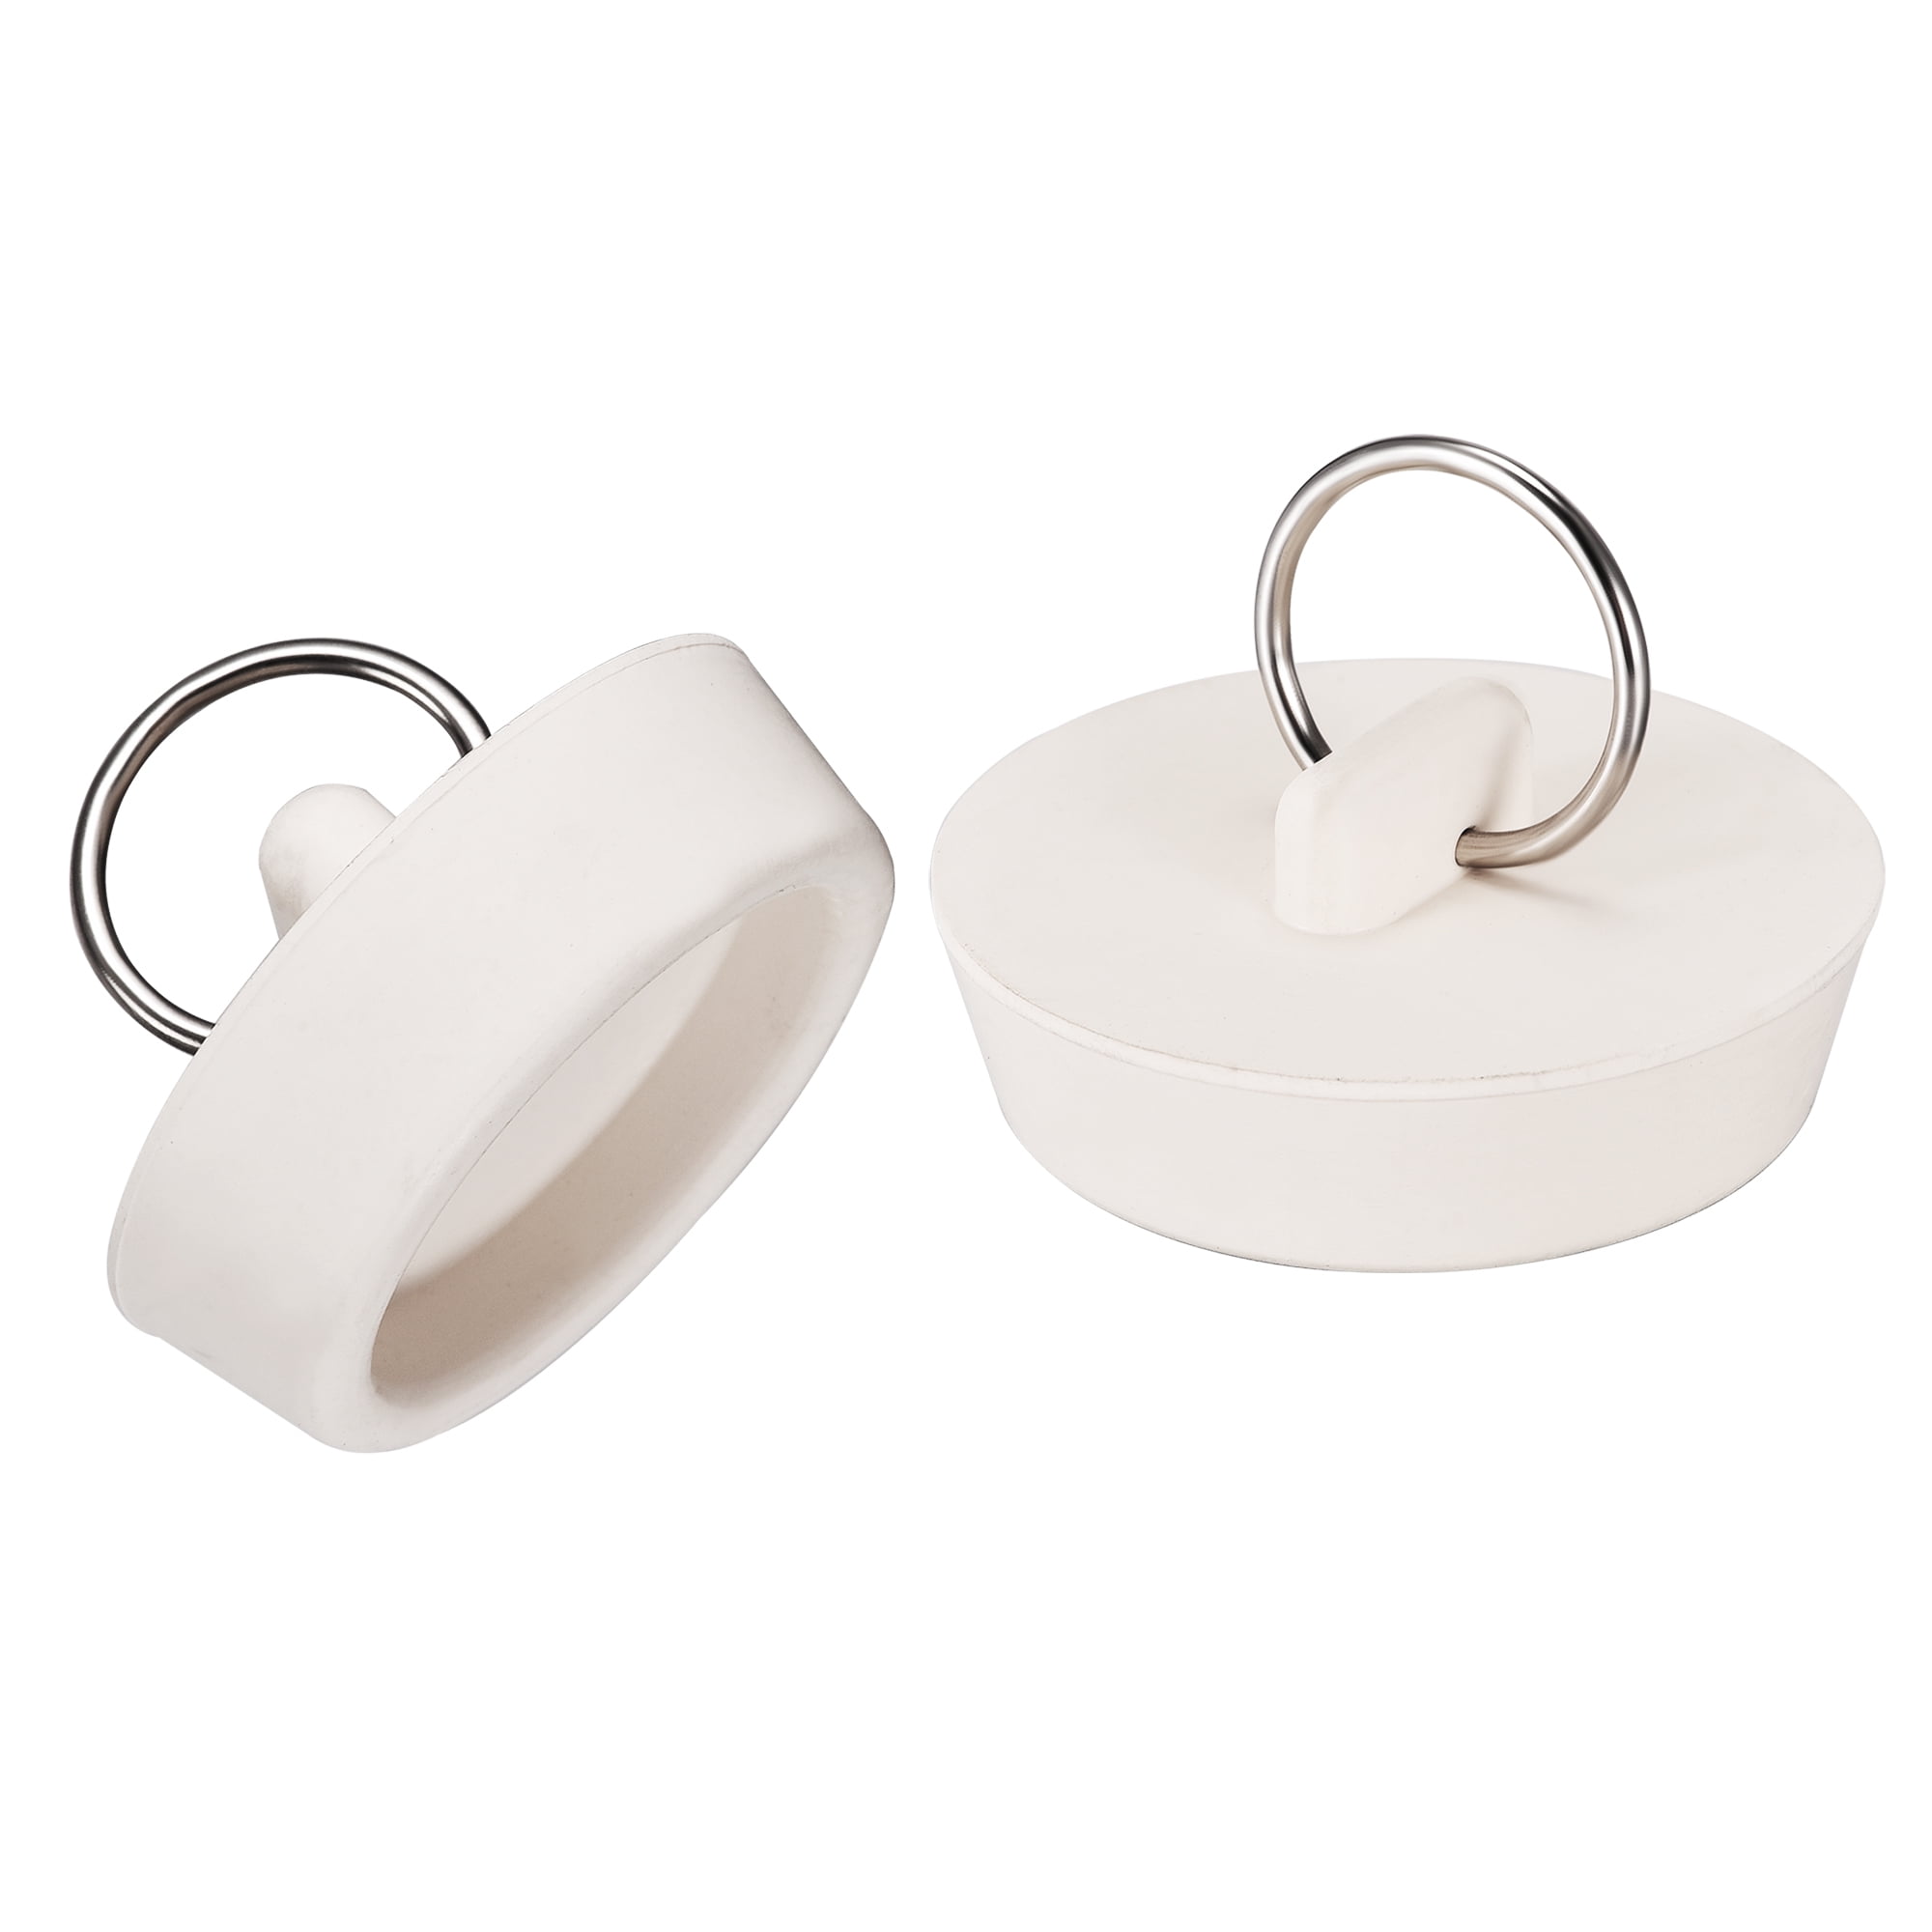 2 Pcs Drain Stopper Set Kitchen and Bathroom Bath Plugs Sink Plug Rubber with Hanging Ring for Bathtub